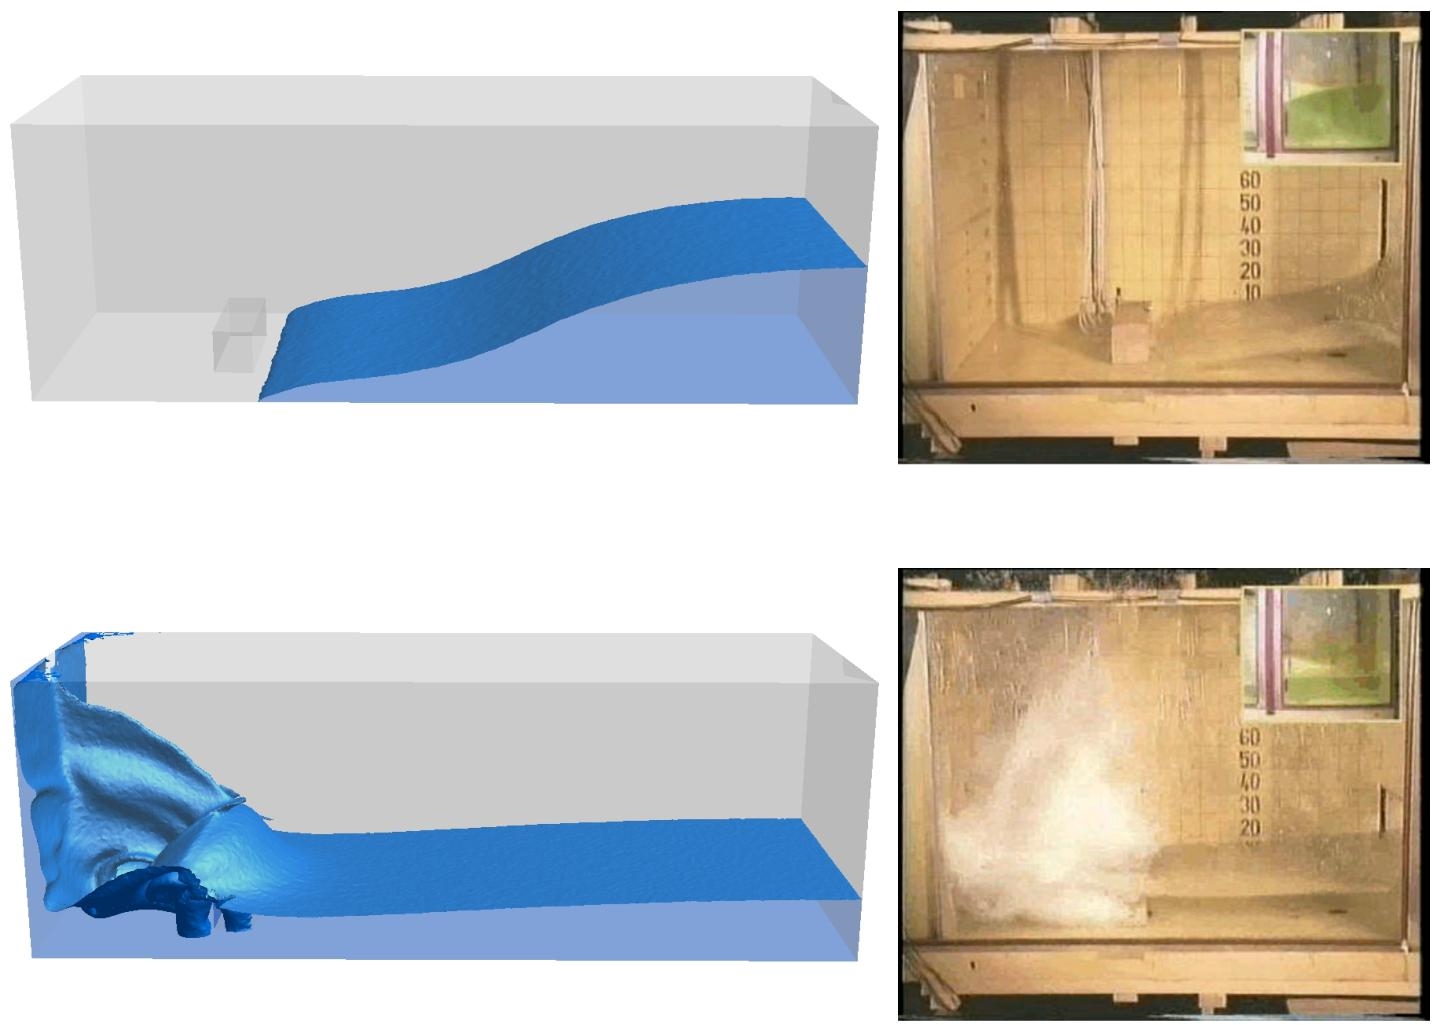 Schematic illustration of 3D falling water column on a obstacle. It depicts the comparison between the interface obtained in the simulation (left) and the pictures from the MARIN experiment (right).